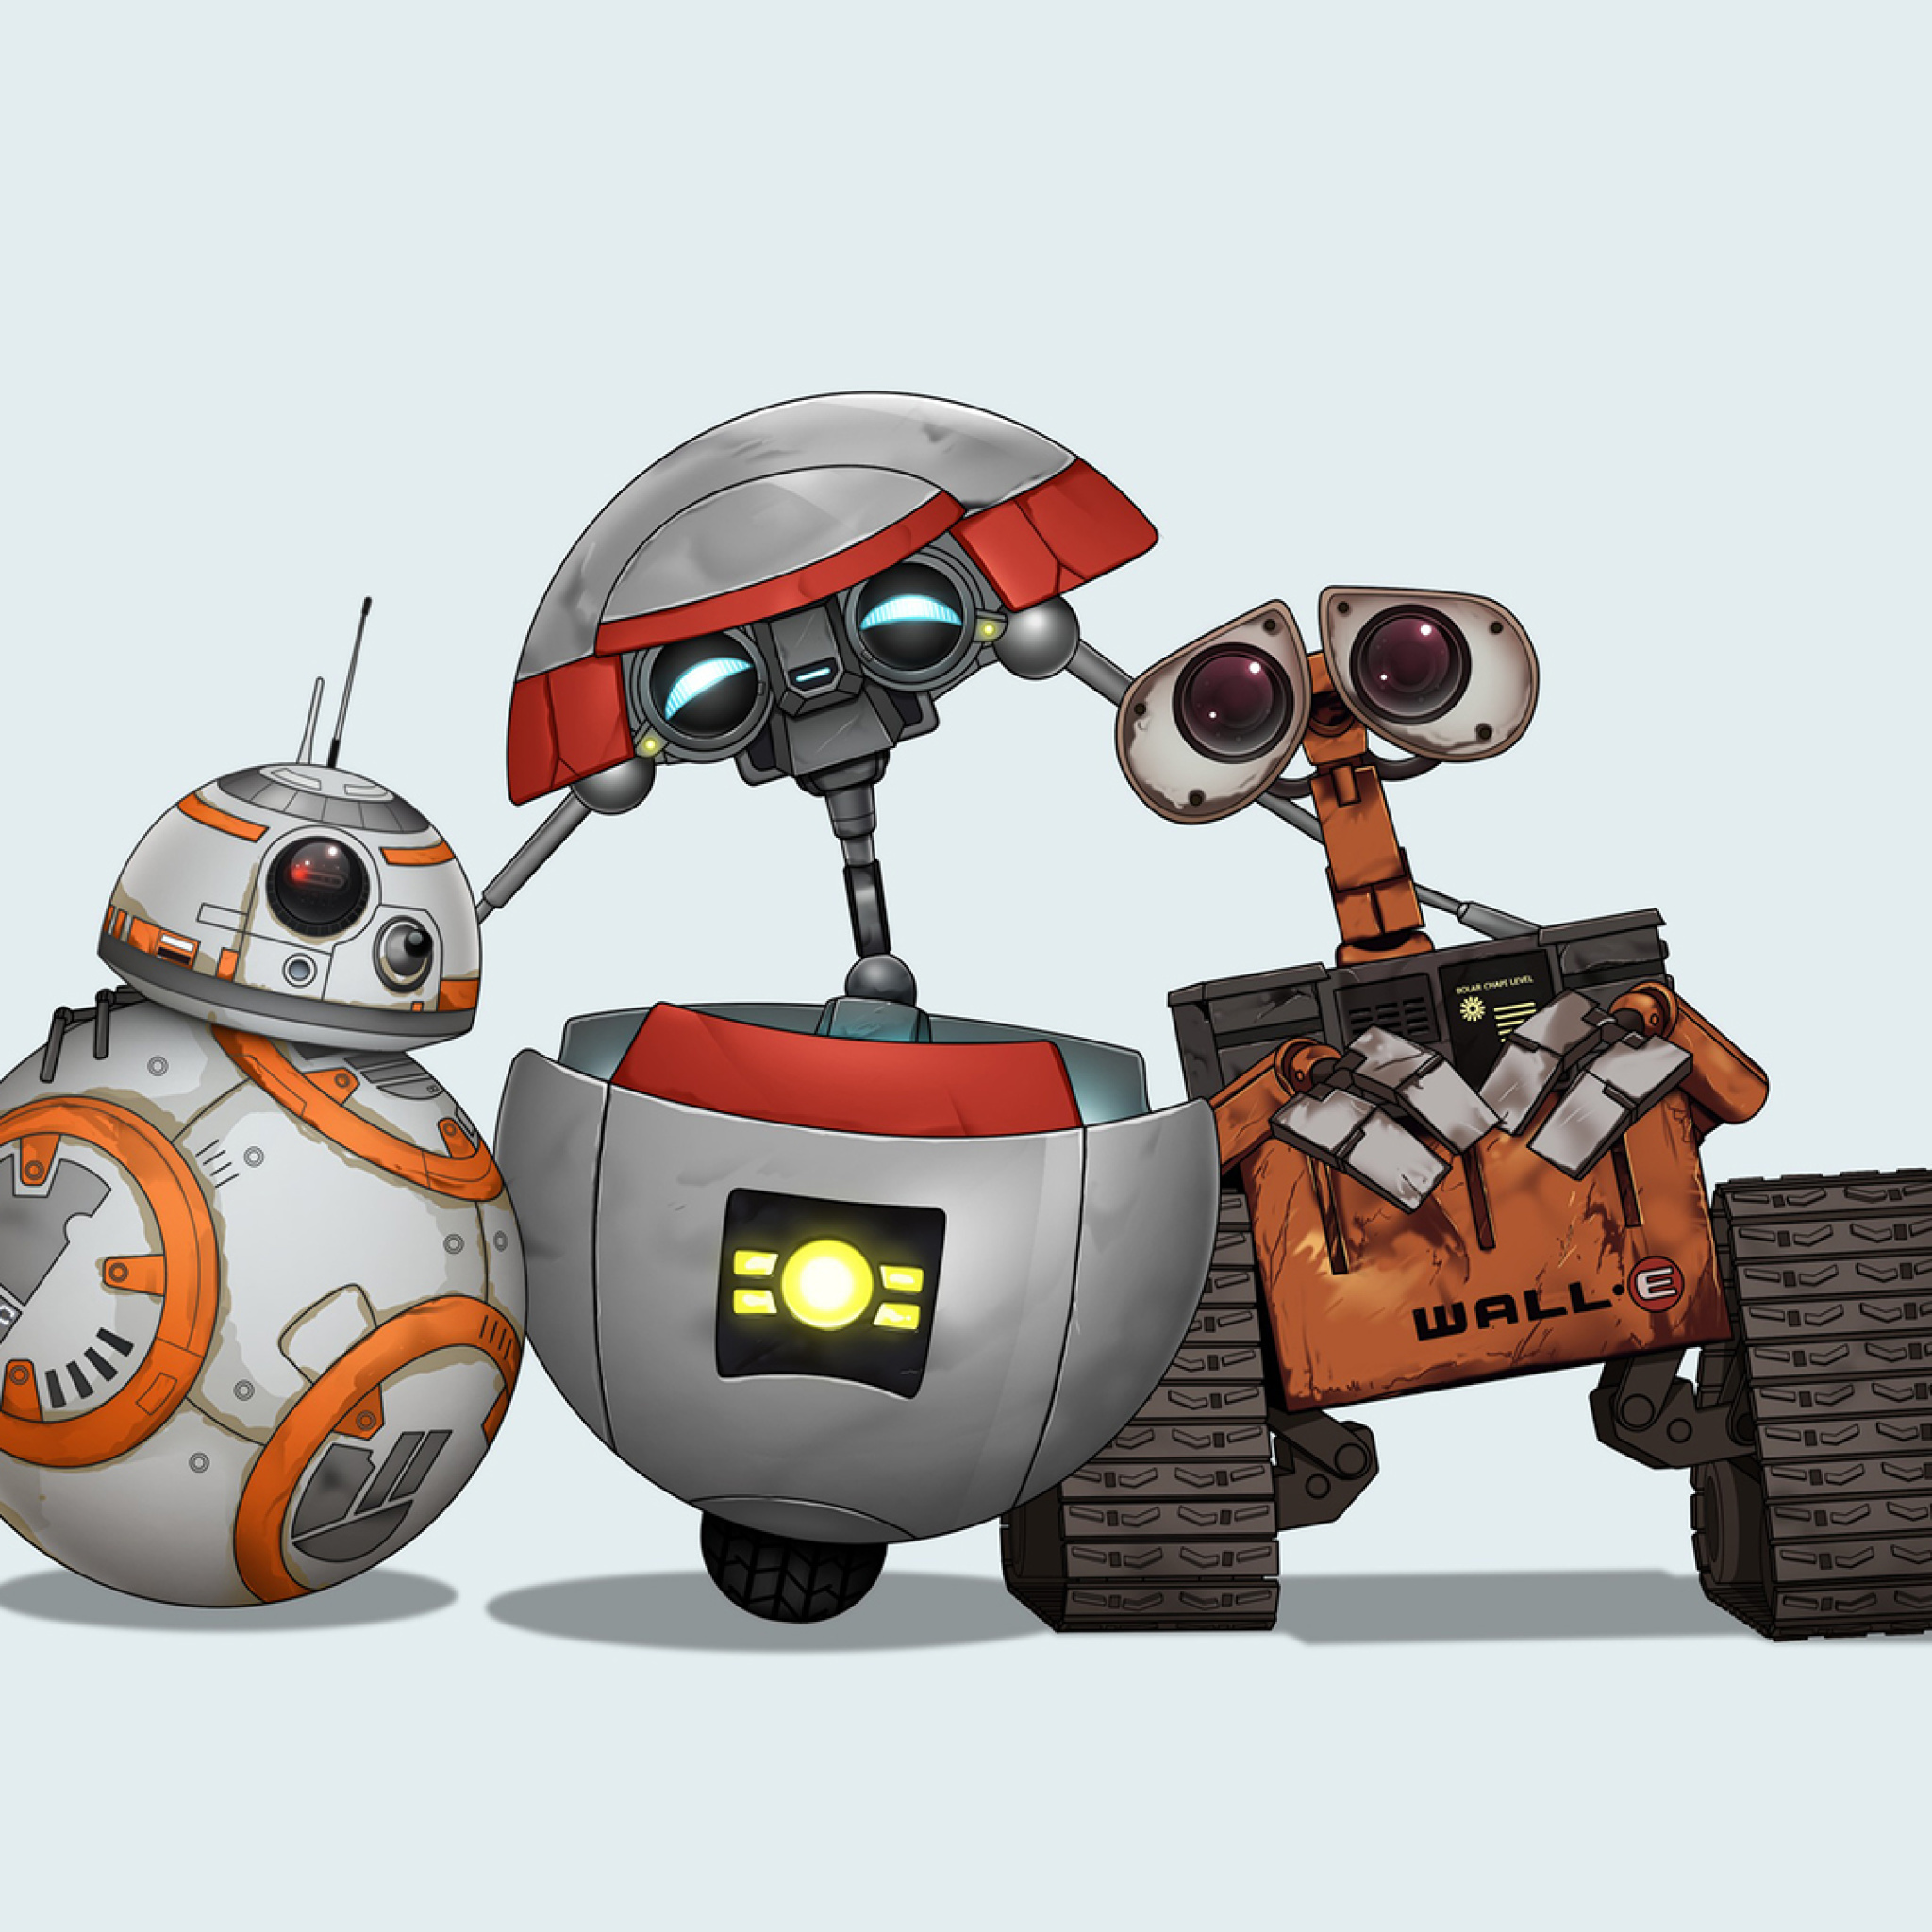 Star Wars and Walle wallpaper 2048x2048